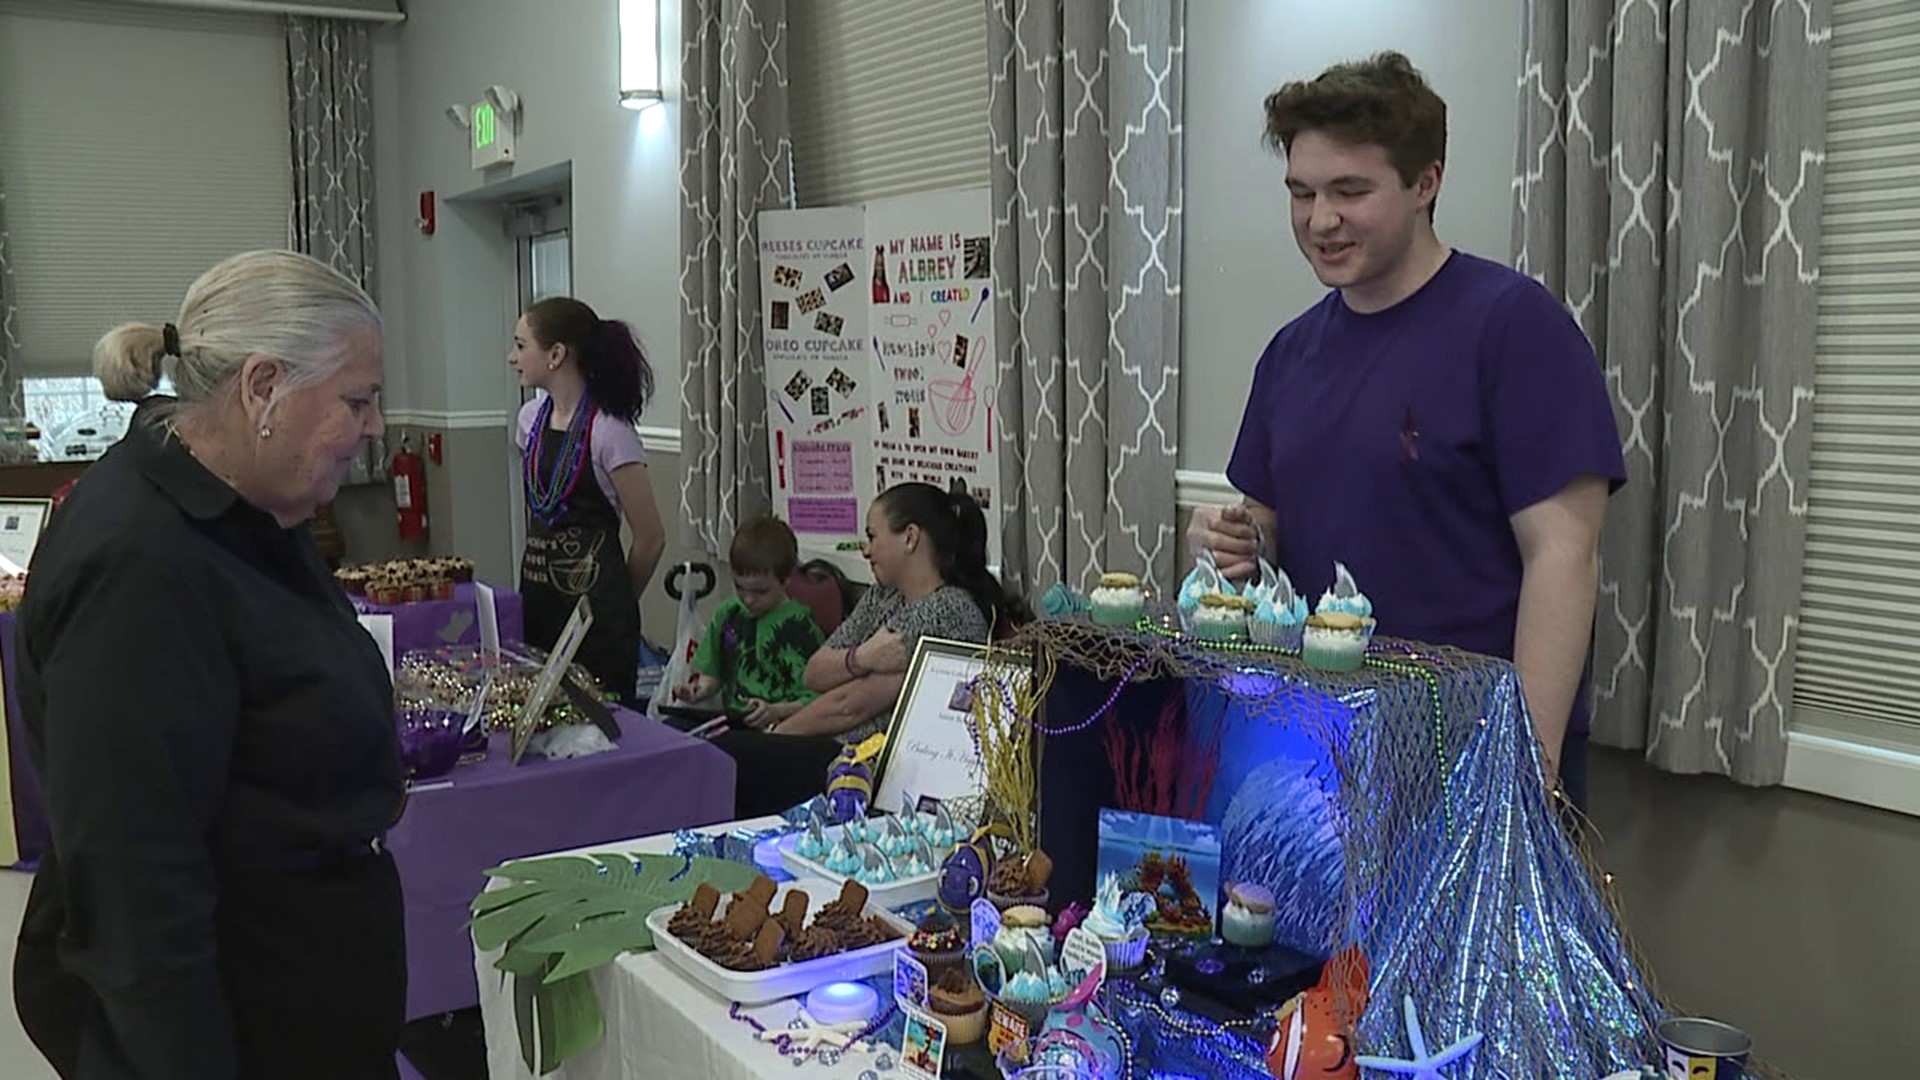 The 11th Annual Cupcake Challenge at Keystone College was held Monday night.